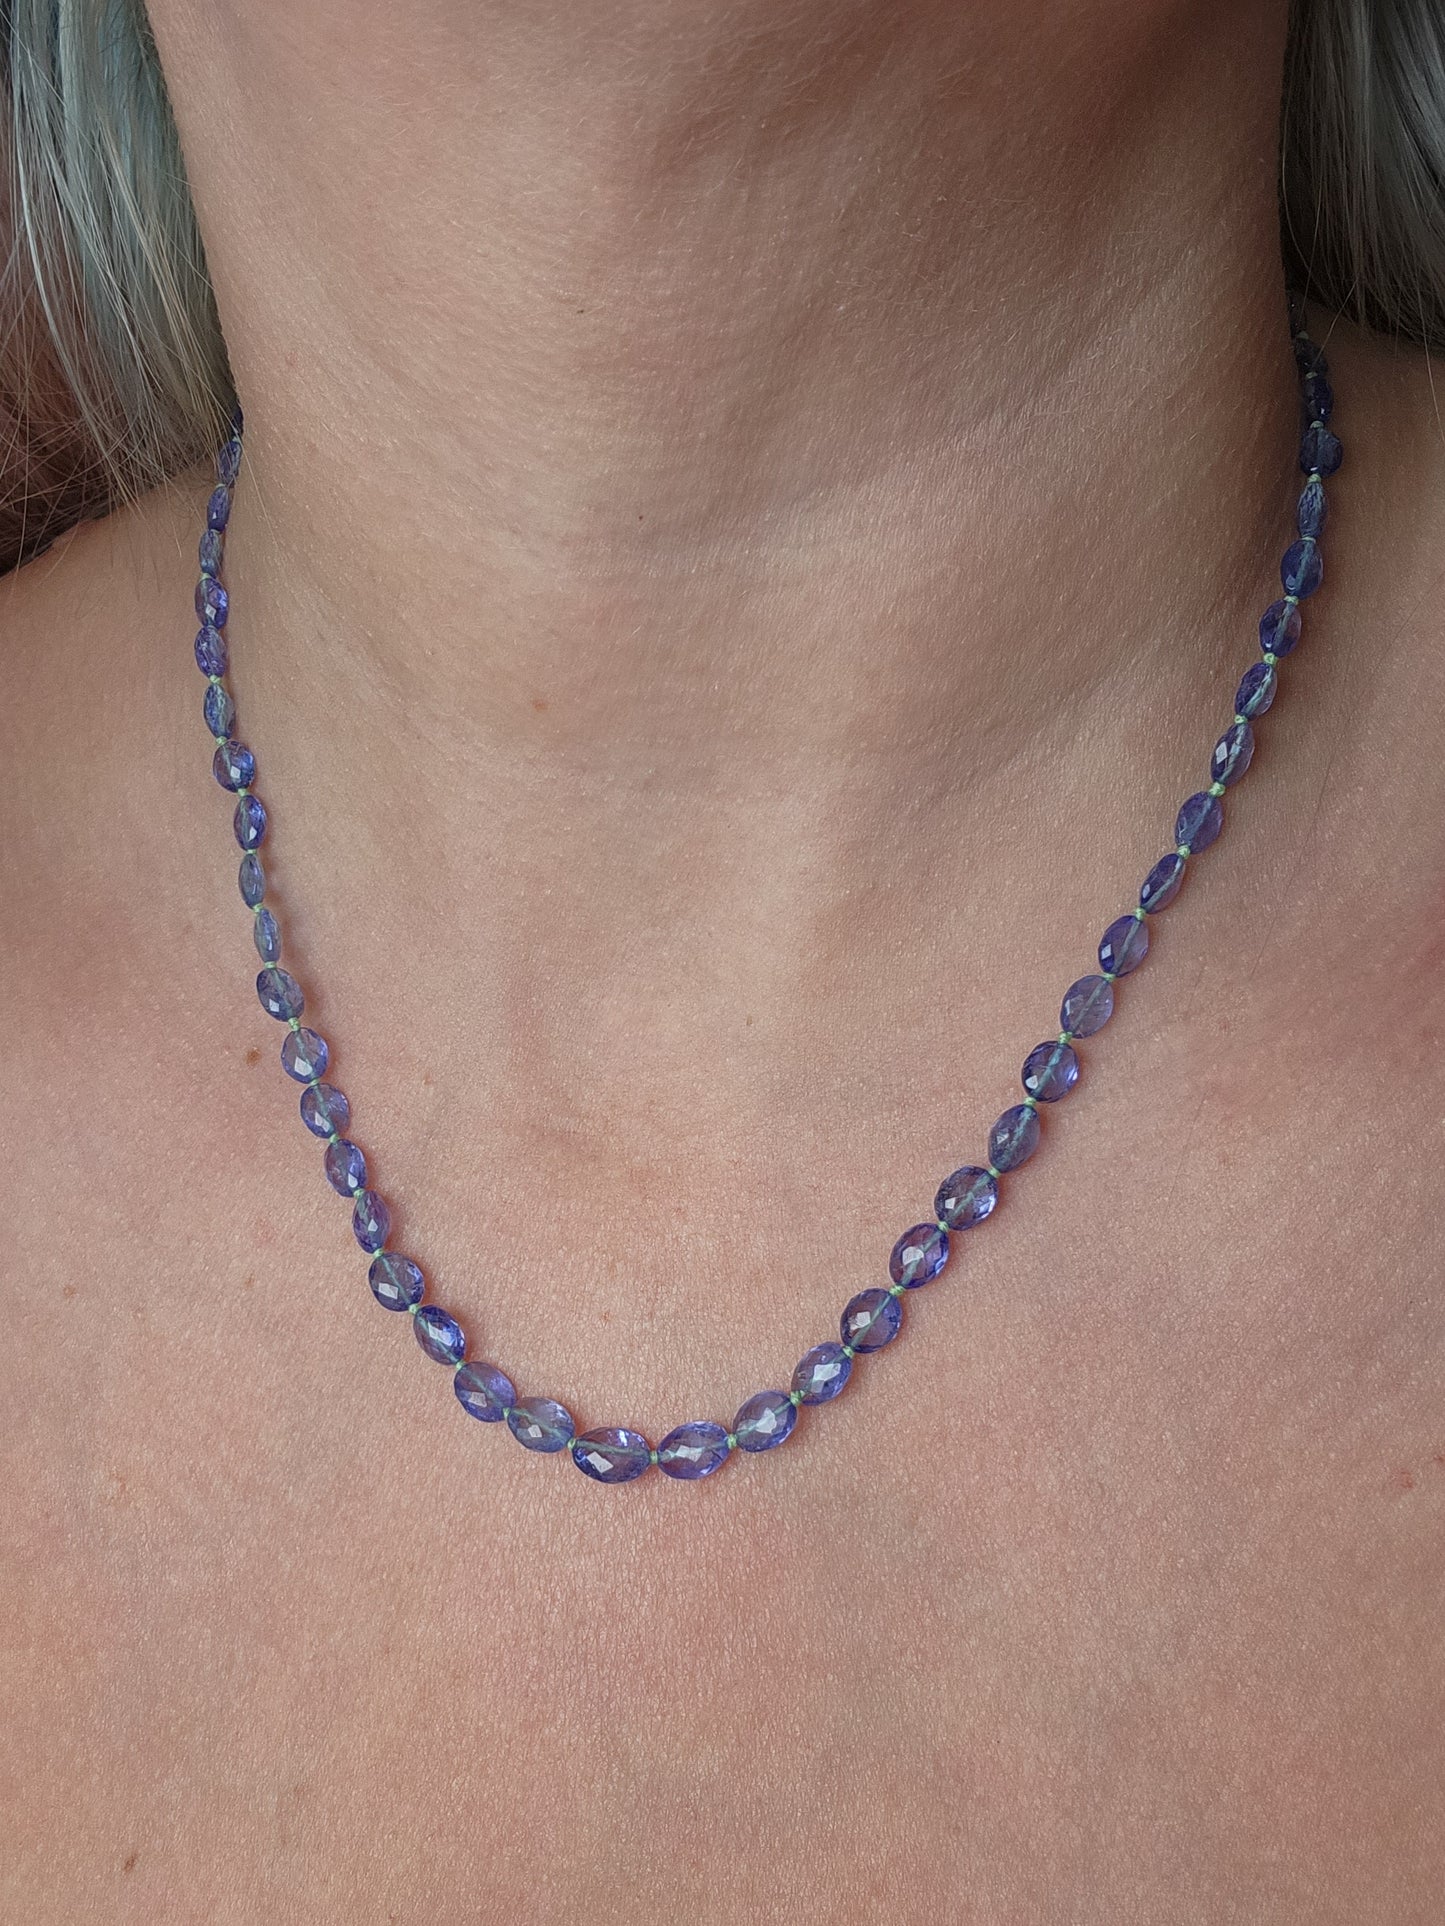 Tanzanite Beaded Knotted Necklace